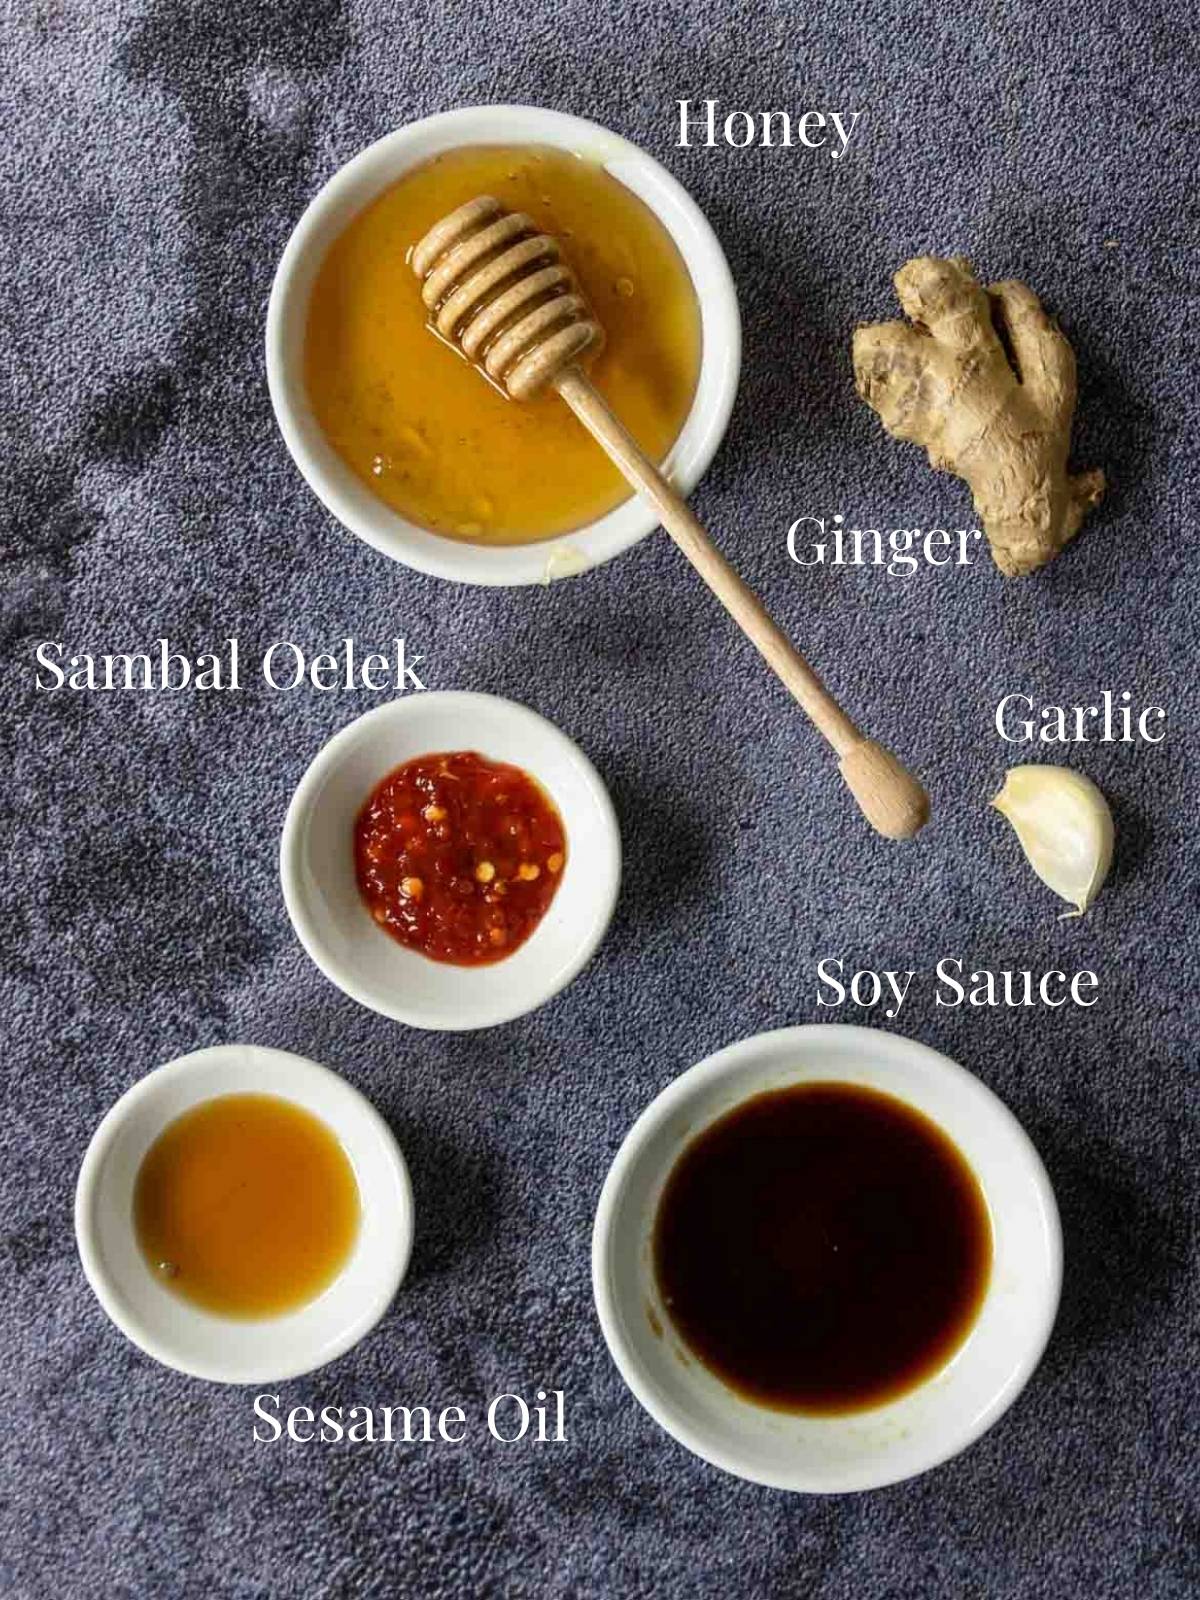 ingredients for an Asian Sauce on a table with labels